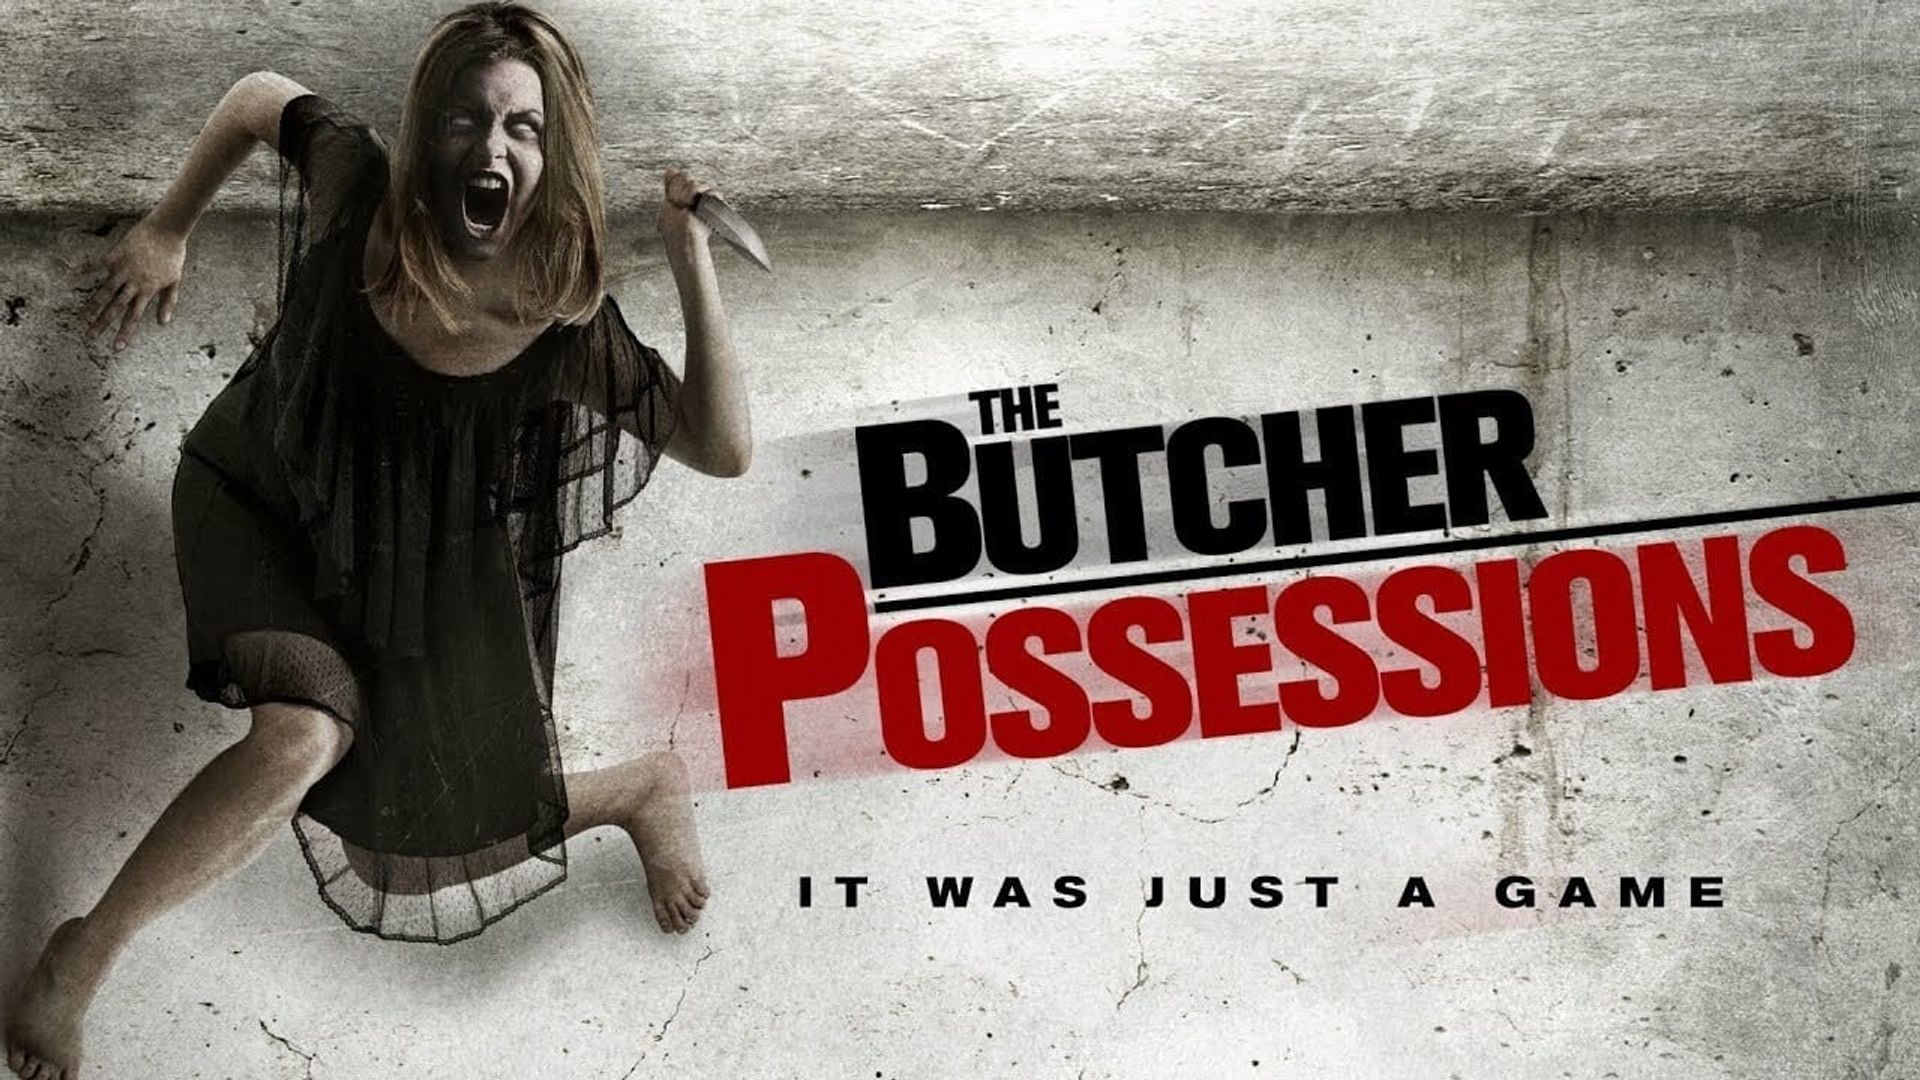 The Butcher Possessions background